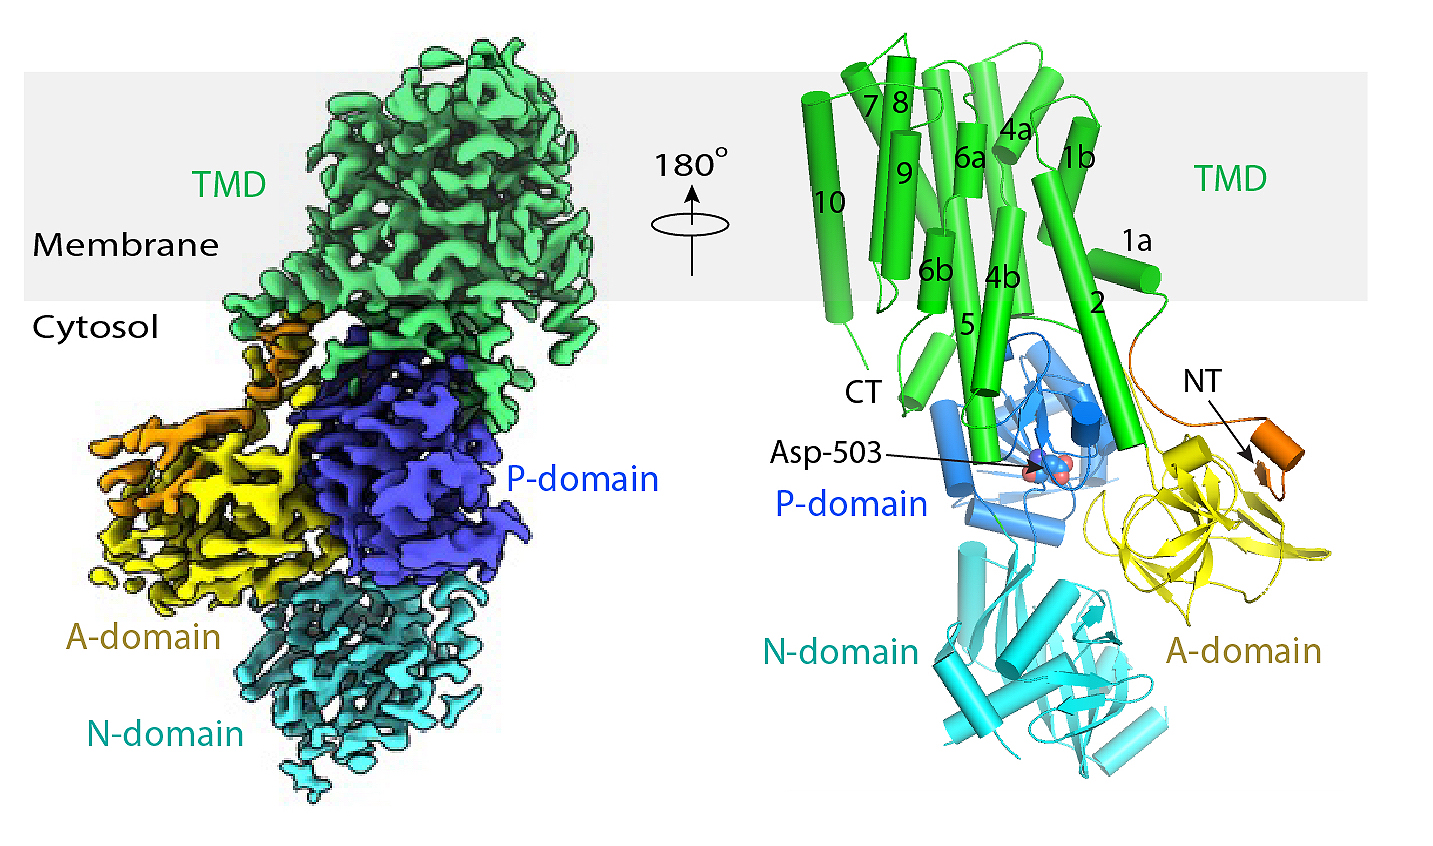 Two diagrams/structures of Neo1. The top part of both diagrams sits on a gray banner that says “membrane.” The rest of the proteins sit on the bottom (white) portion labeled “cytosol.” Left: a space-filling rendering of the protein. Right: a ribbon cartoon of Neo1 with the different alpha helices labeled 1-10 (including 1a, 1b, 4a, 4b, and 6a, 6b). A symbol between both structures says 180˚ and indicates that the protein on the right was rotated 180˚ compared to the protein on the left with respect to the y-axis. Both proteins have sections that are color coded and labeled according to the caption. The protein on the right has a cluster of red and blue spheres in the center of the P-domain; one of the spheres is labeled “Asp-503."